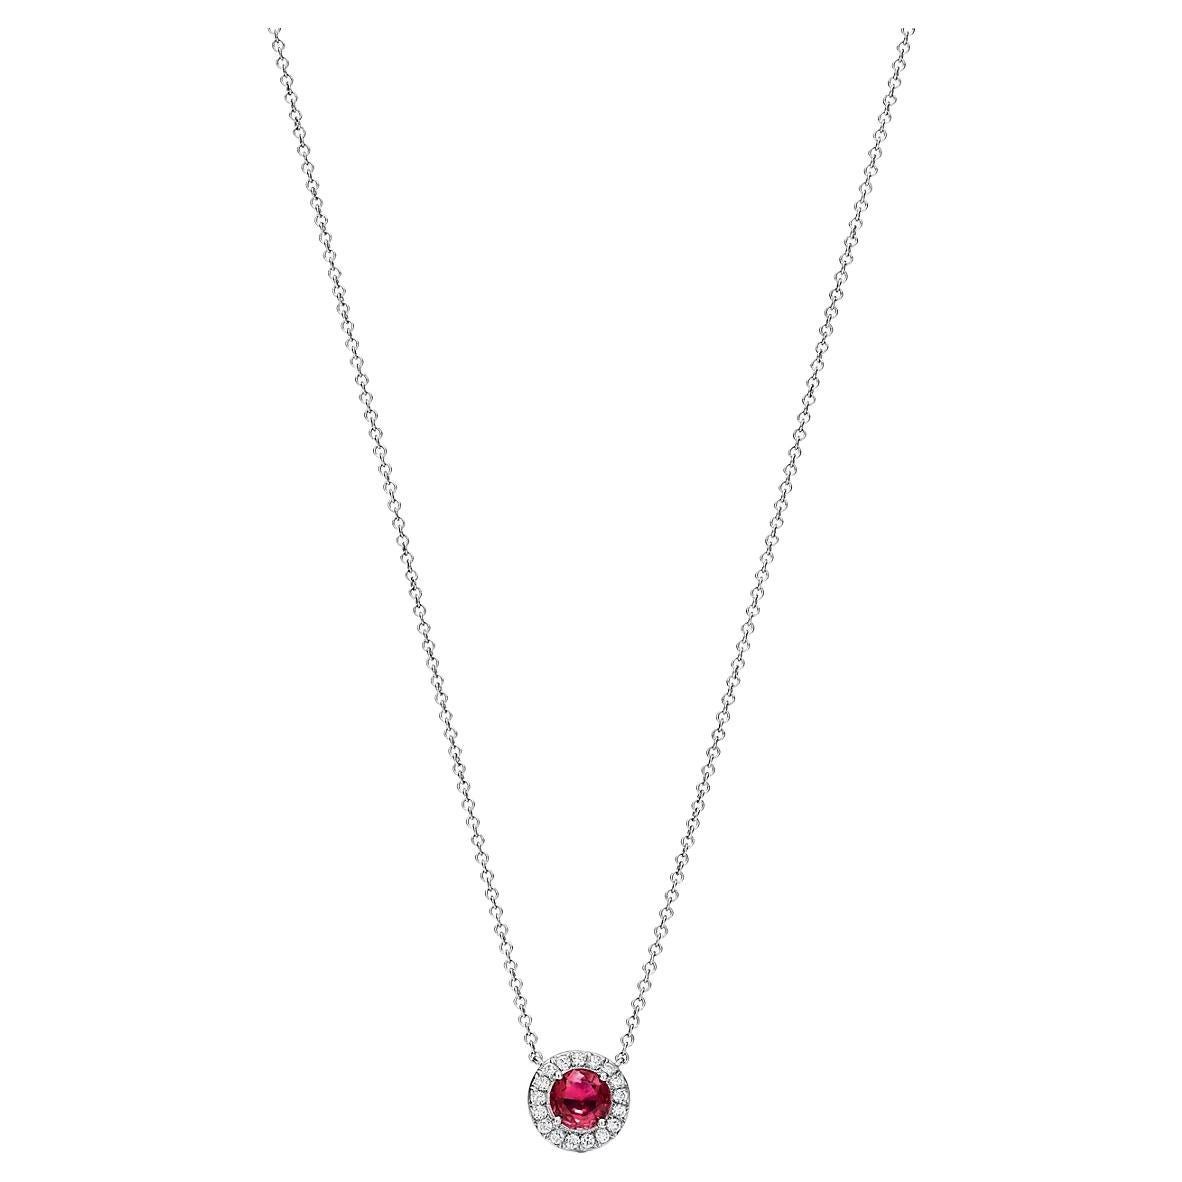 Tiffany Soleste pendant in Platinum with a Ruby and Diamonds